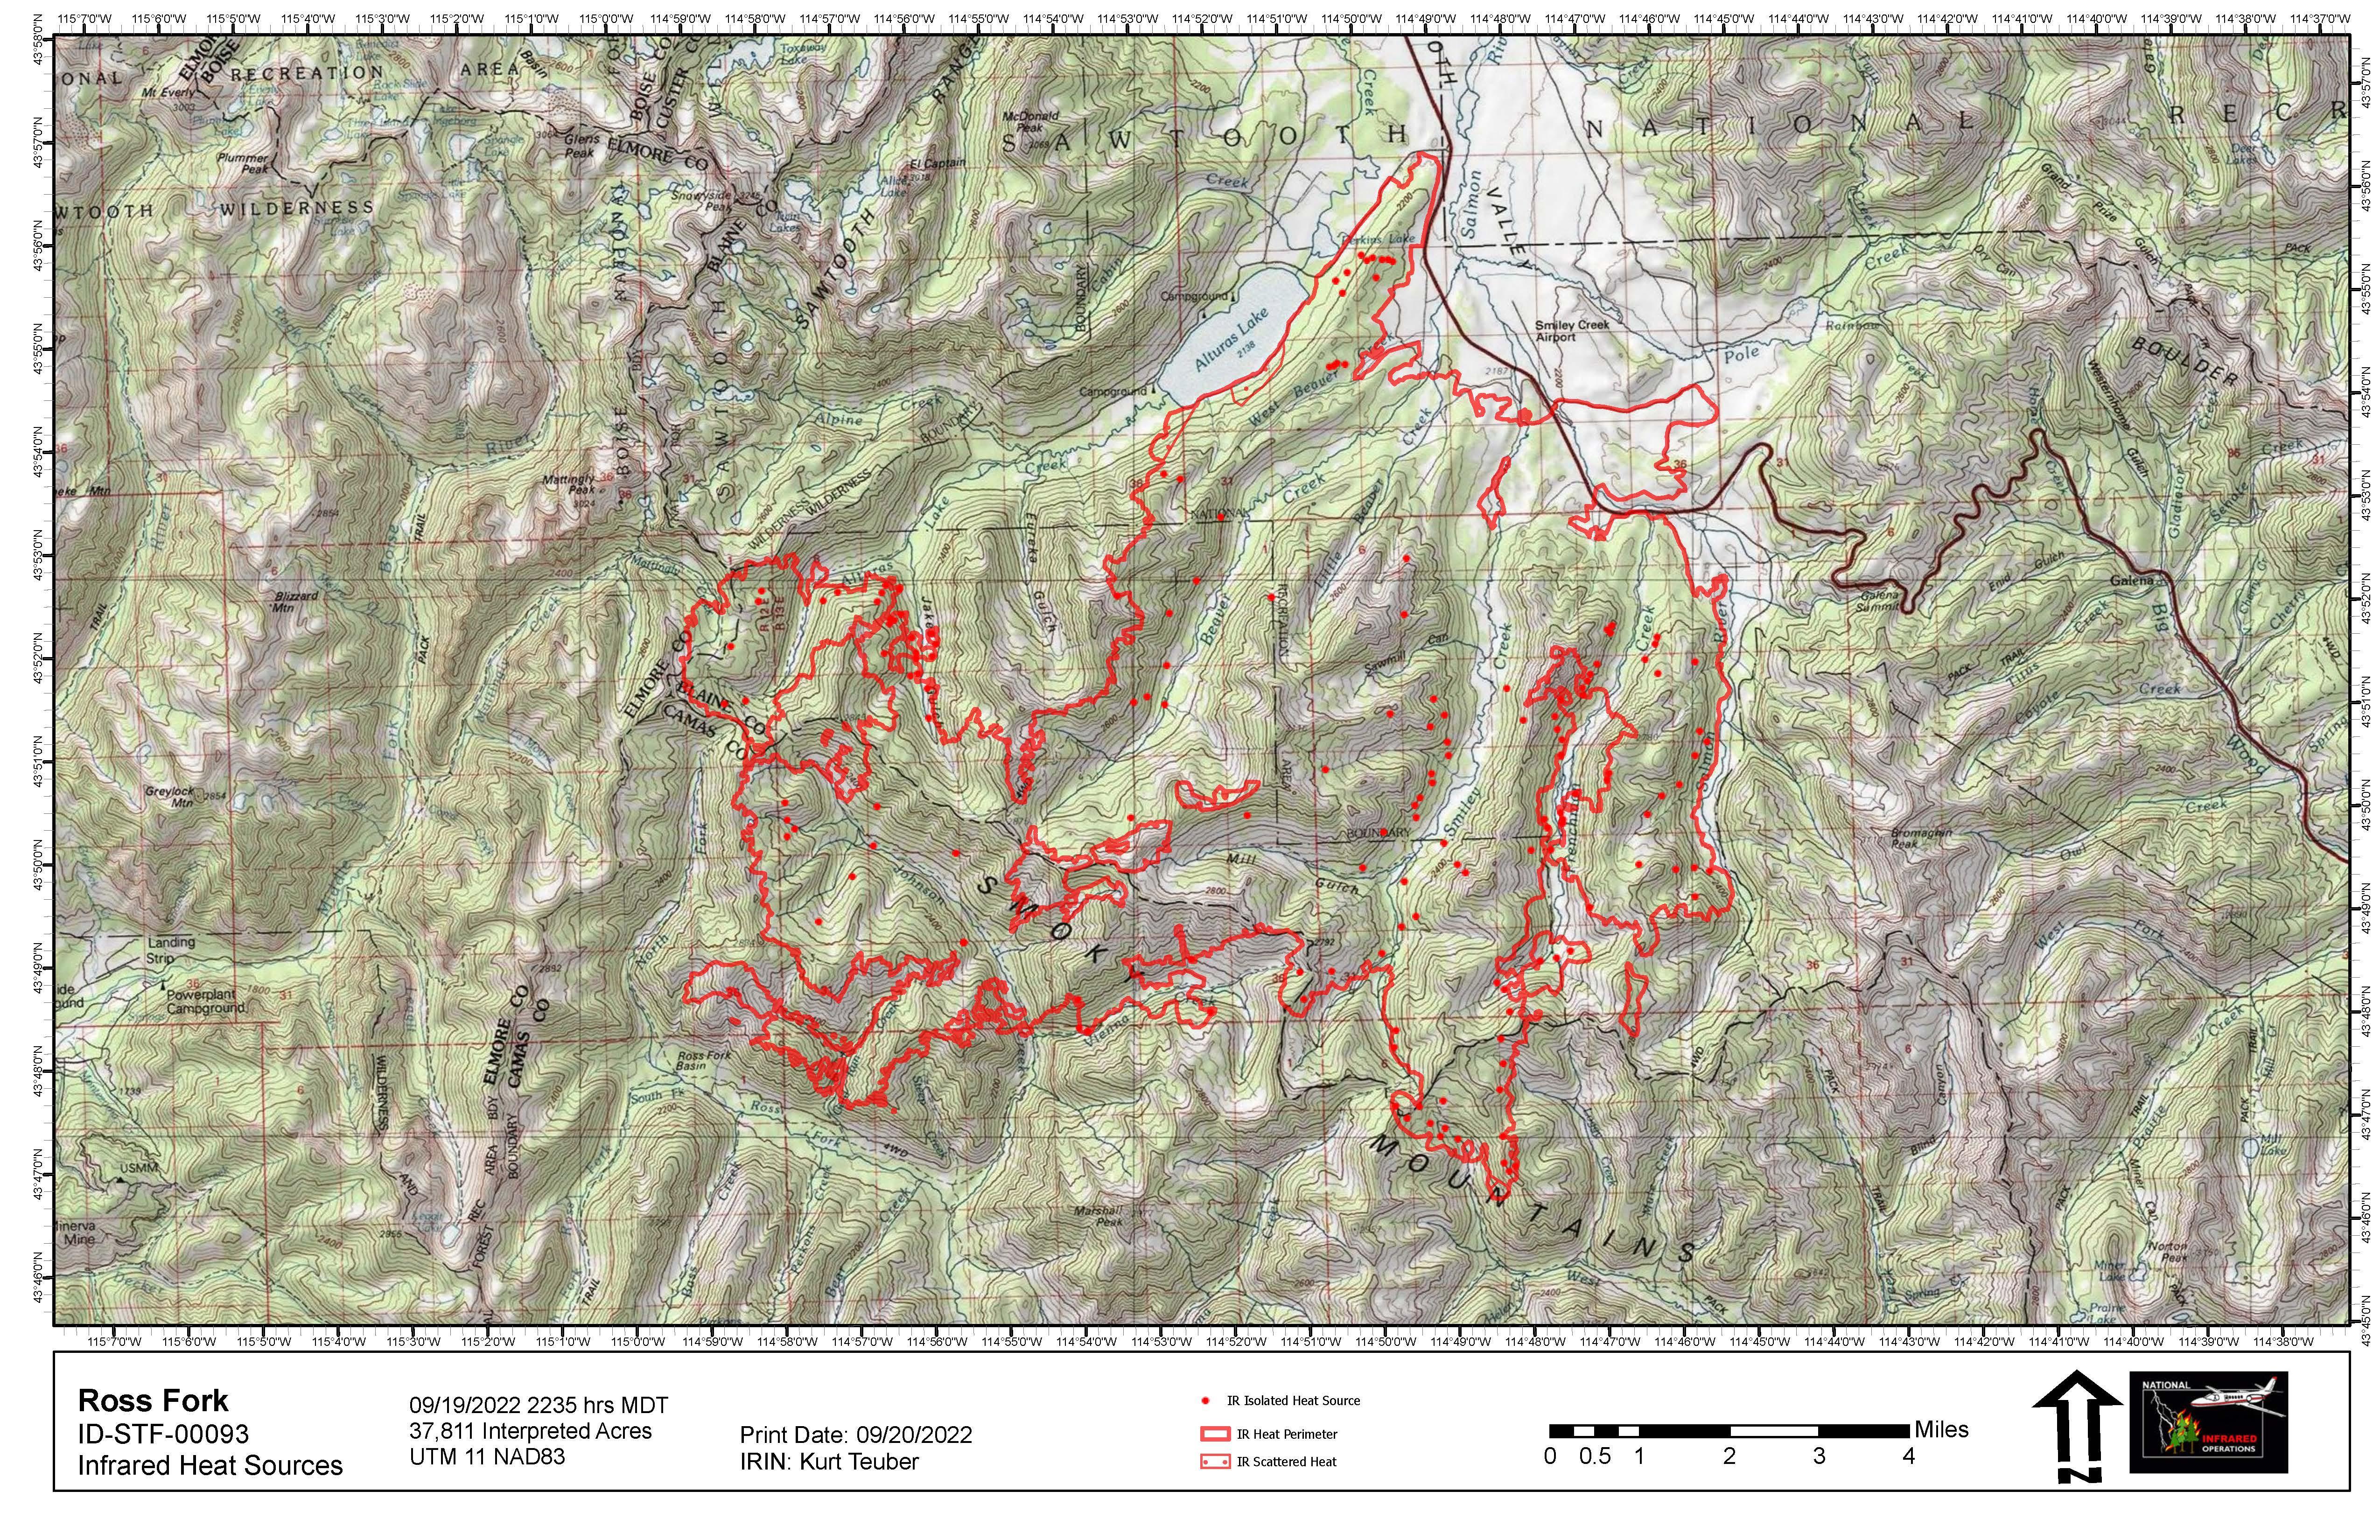 Ross Fork Fire perimeter map, Tuesday, 9-20